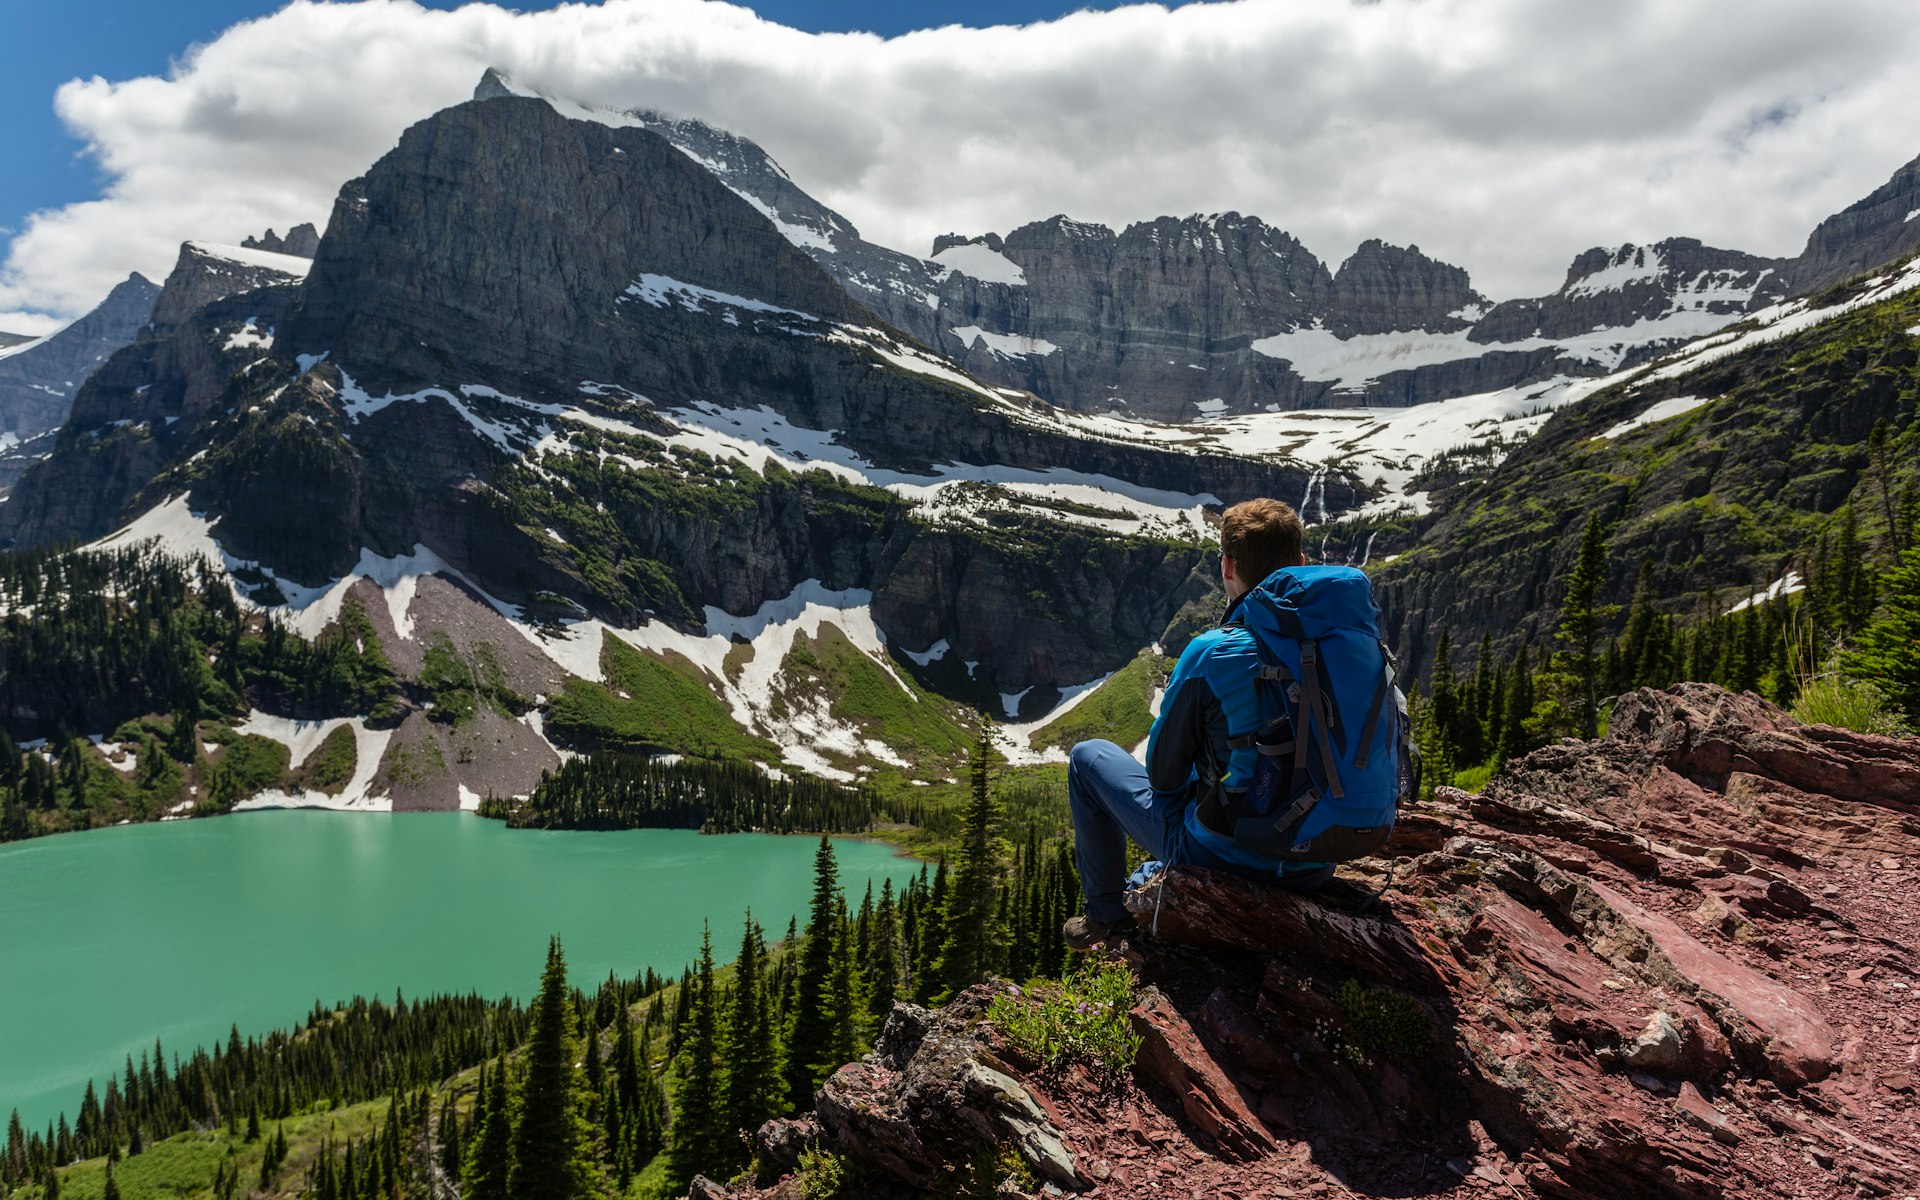 A hiker sits on a precipice looking down over an alpine lake